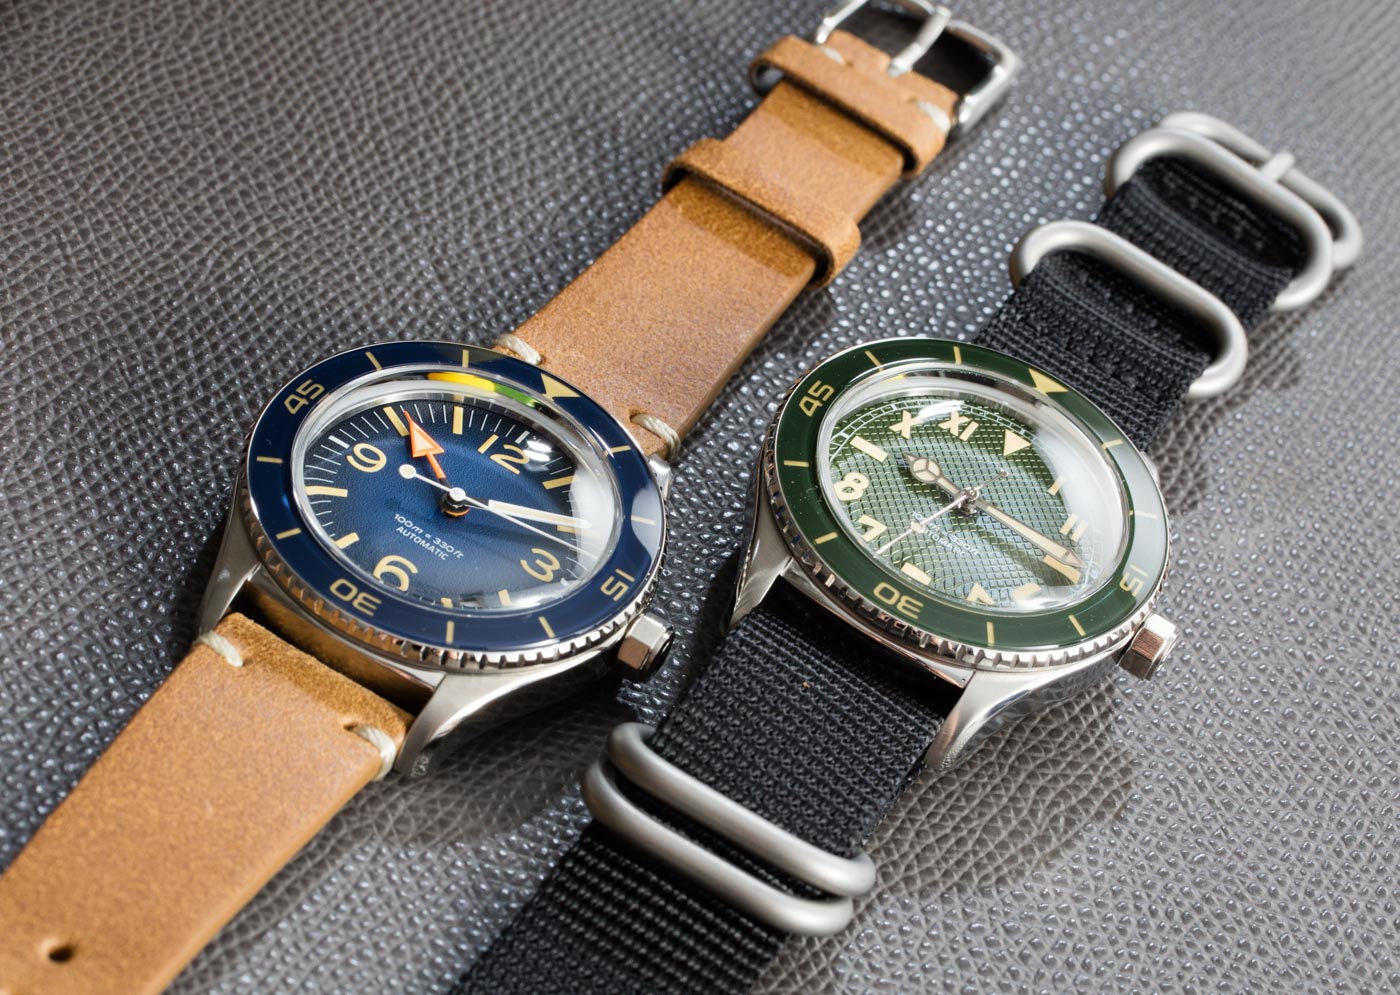 UNDONE Basecamp 2.0  Cali Dial Watches Hands-On | aBlogtoWatch